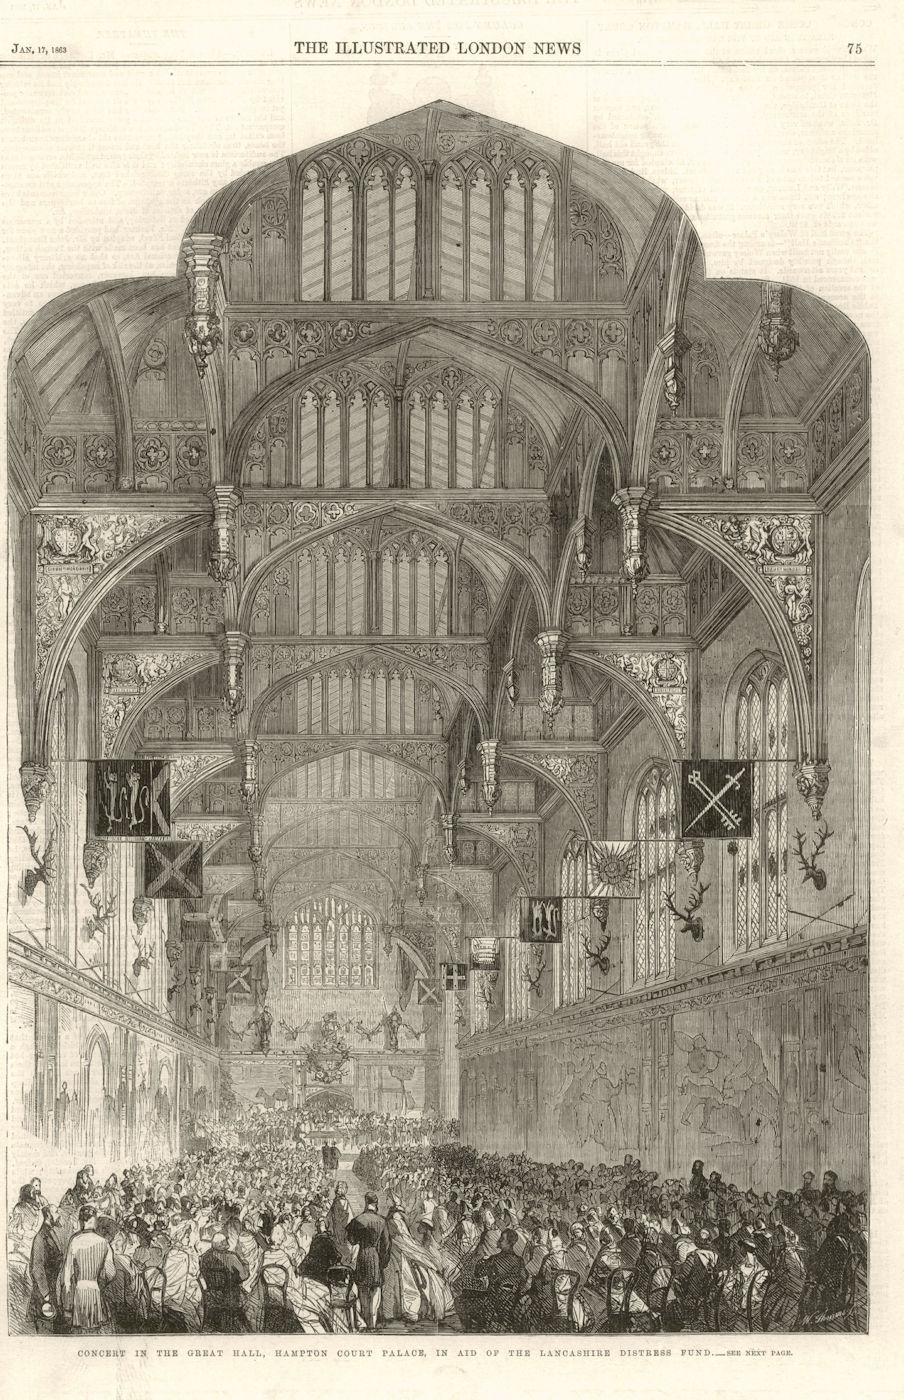 Hampton Court Great Hall concert for the Lancashire cotton famine fund 1863